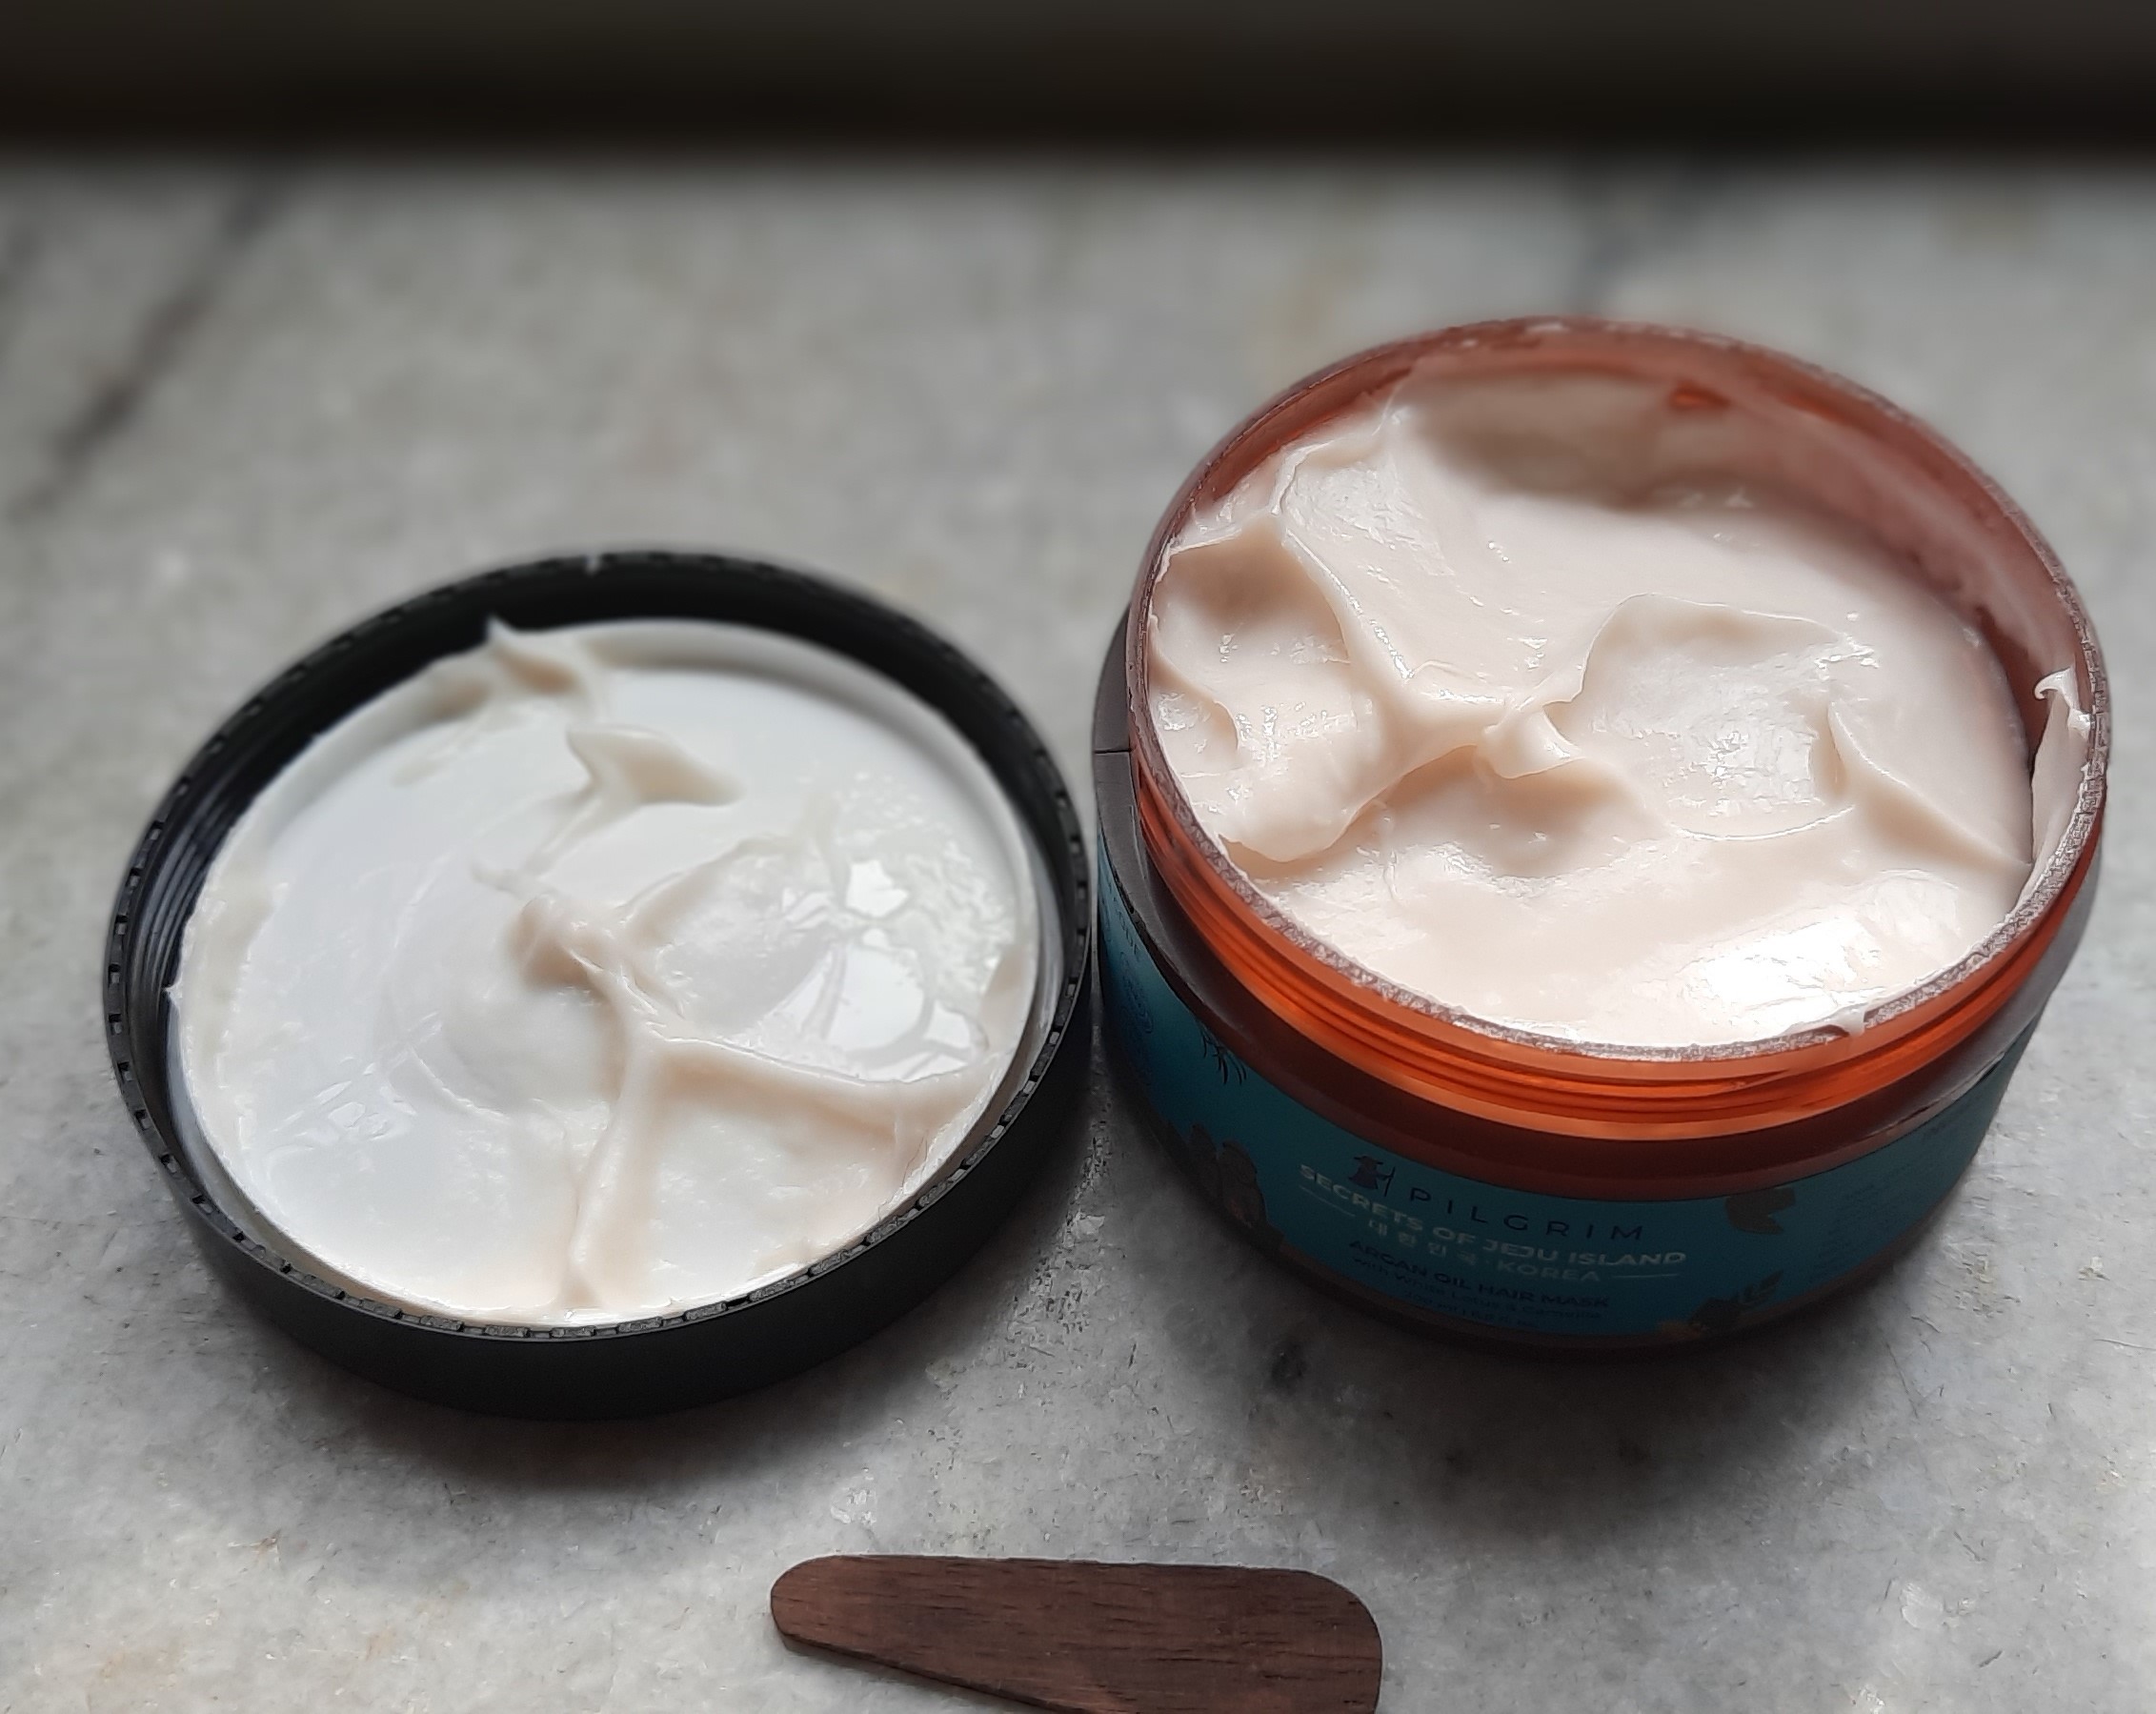 Pilgrim Argan Oil Hair Mask with Camellia and White Lotus Extract has a nice, thick consistency which makes it easy to apply on hair. HAIRCARE PRODUCT REVIEW  SKINCHEMSCIENCES